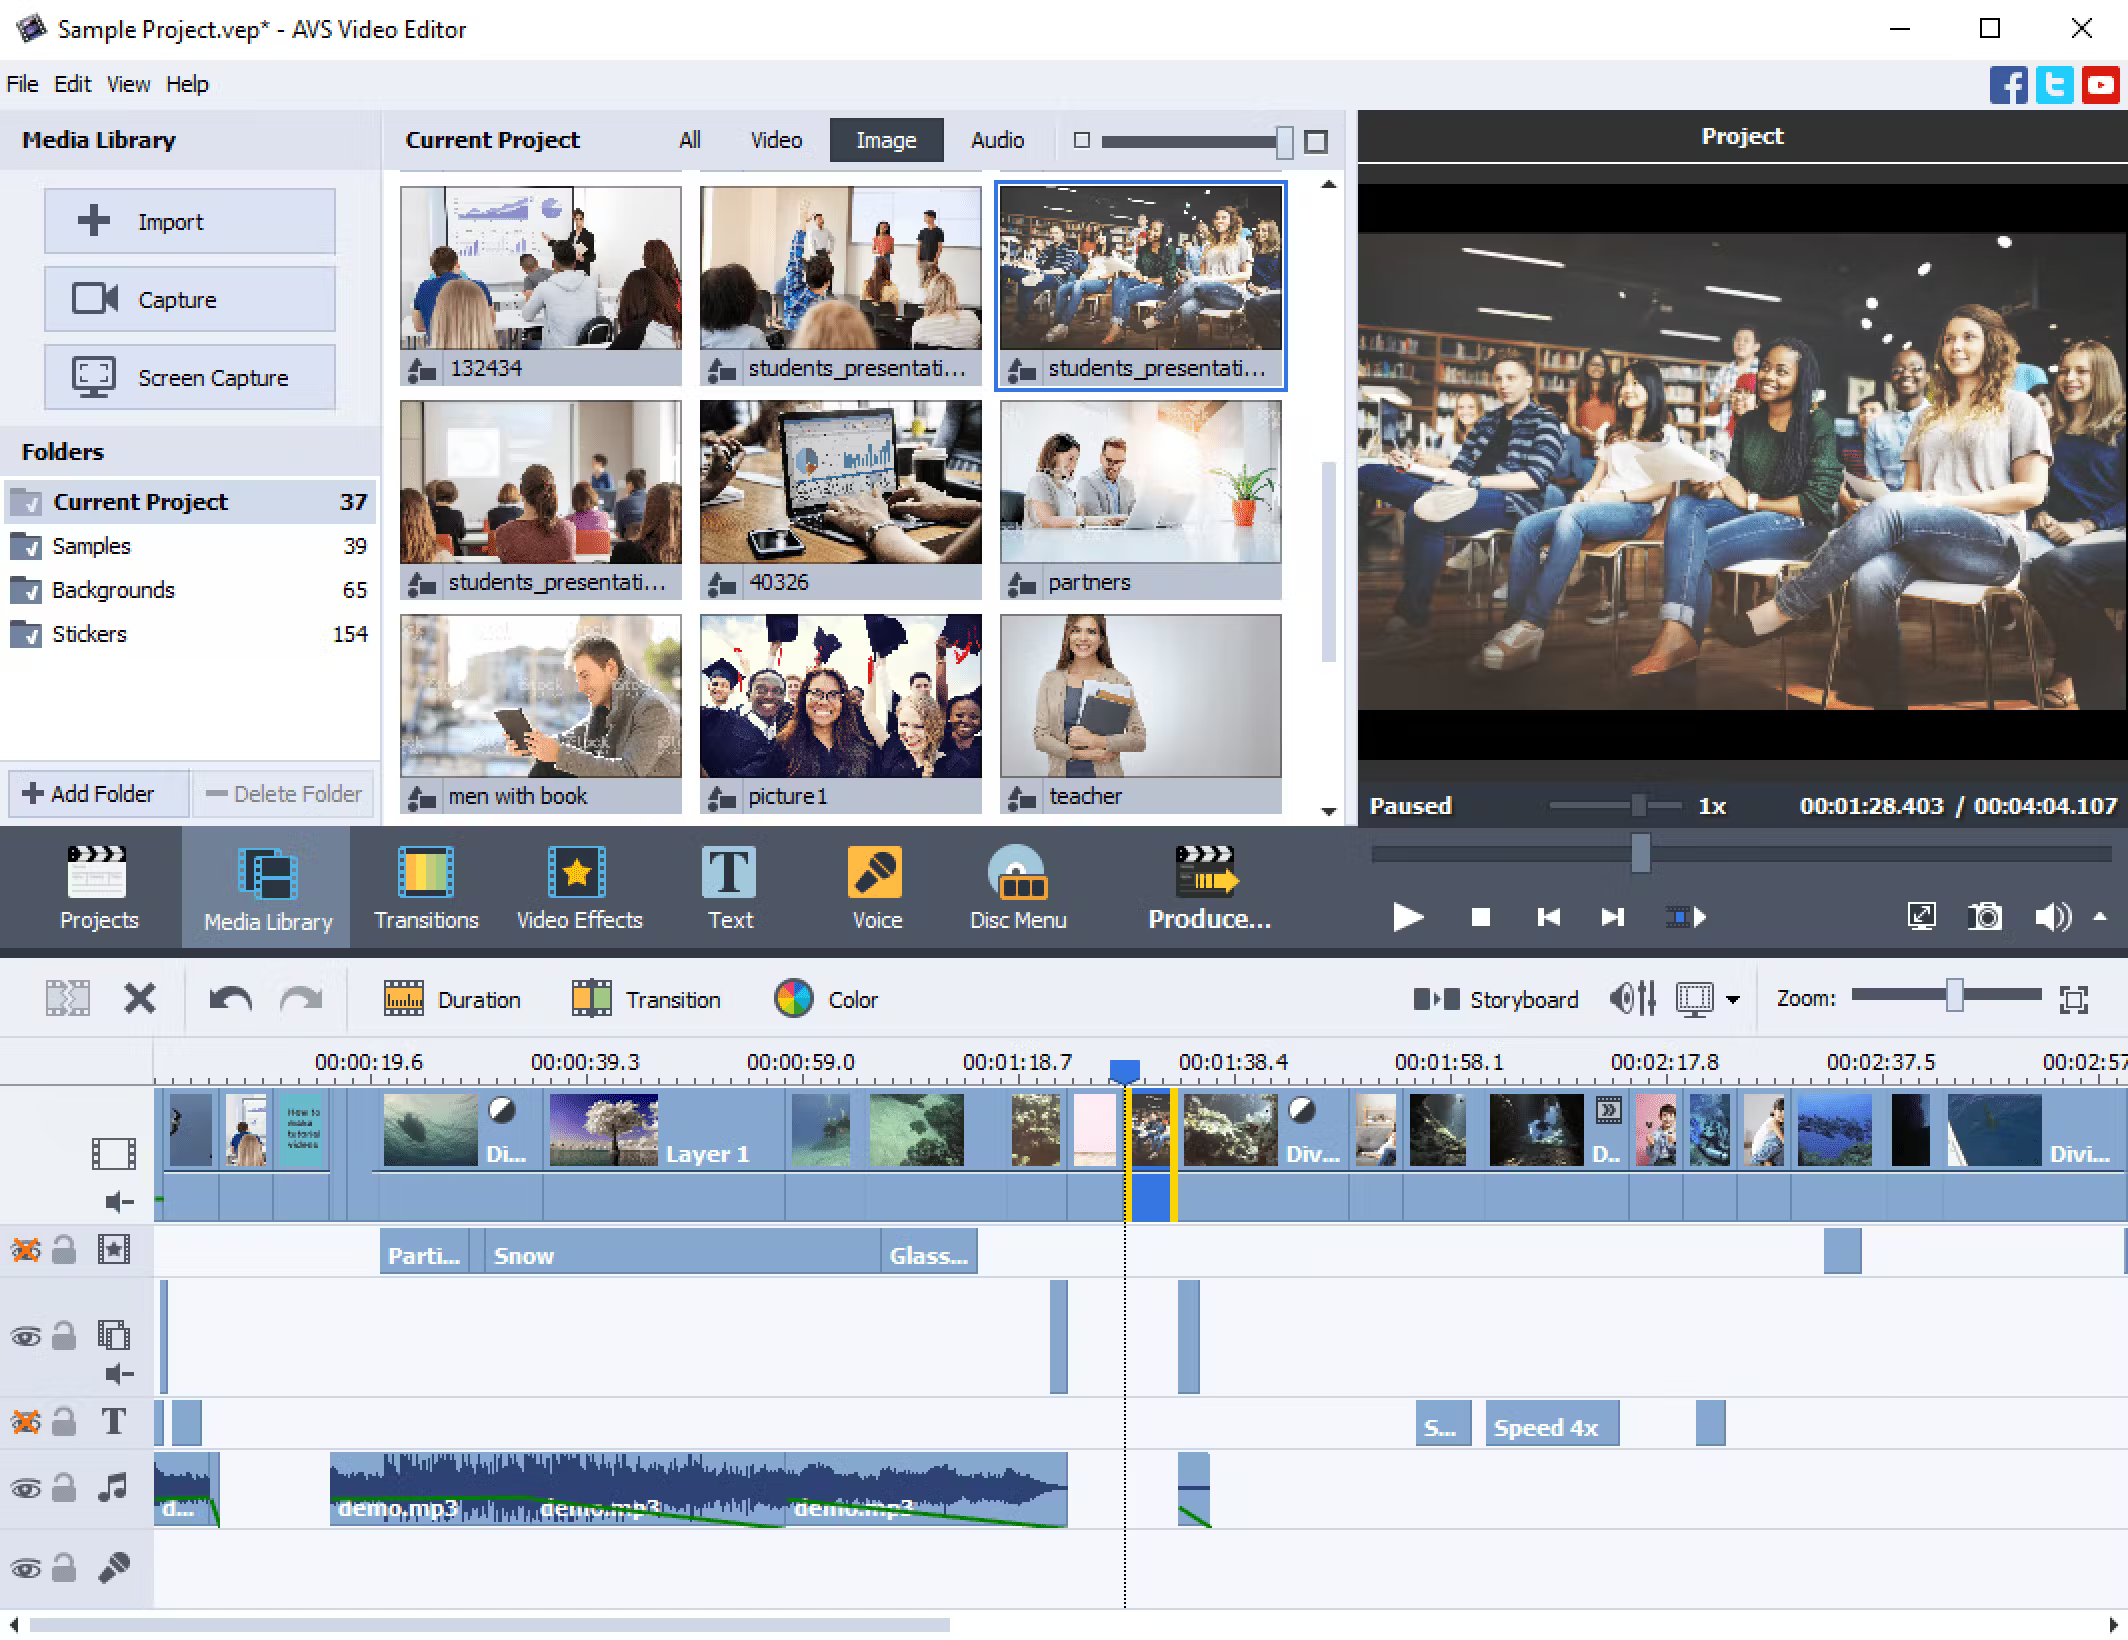 The-media-library-tab-in-AVS-video-editing-software